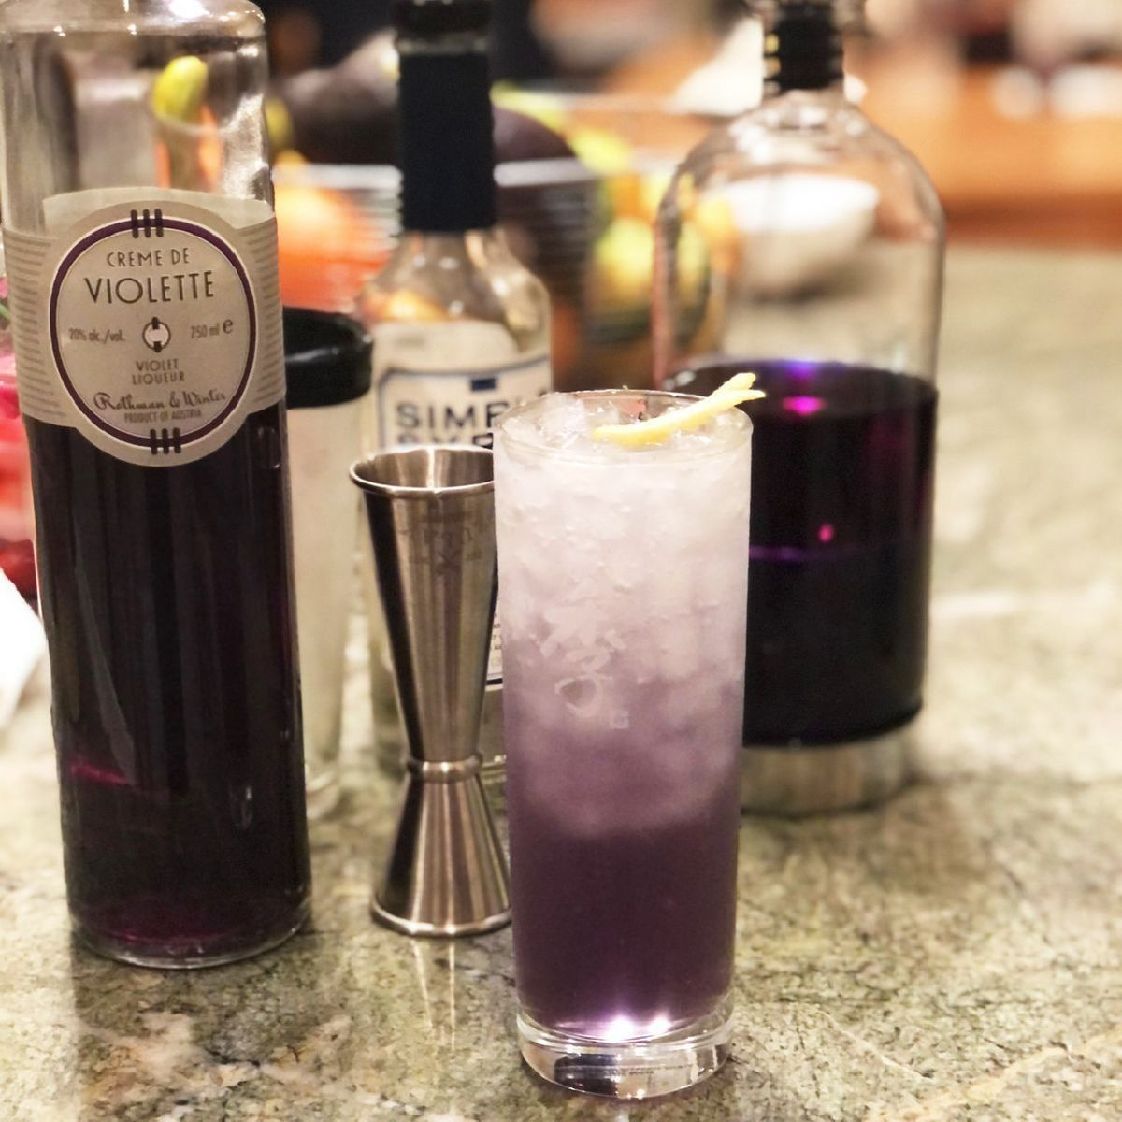 One of the first cocktails I ever loved was the Violet Fizz, which I regularly ordered when I lived in Japan -- and here's the scandalous part -- when I was fifteen! I went to high school on the Navy base, but in Japan, off-base, alcohol was freely available without ID. Teenagers didn't have to drink in secret places, either. We could hold our heads up high in proper nightclubs and order fancy cocktails with abandon. And the Violet Fizz was my drink of choice.
 
Until a few years ago, it was really difficult to find crème de violette. My sister would bring it back for me when she visited Europe, and it was such a luxury! But now, it's fairly easy to get, and therefore a reliable favorite when I'm mixing something up.
 
One thing I noticed when I started making Violet Fizzes at home was the color was never as intense as it was in Japan. I have a bottle of the very rare Hermes Violet by Suntory that I brought home from a visit to Japan a few years ago, and that produces a more familiar hue, but I'm terrified of using it up! So I use the Rothman & Winter Crème de Violette, which is lovely and fine. But this time I decided to infuse my Bombay Sapphire with butterfly pea flowers to create an intensely purple base. And it worked! If you're as attracted to purple drinks as I am, you'll see this is an enormous victory!